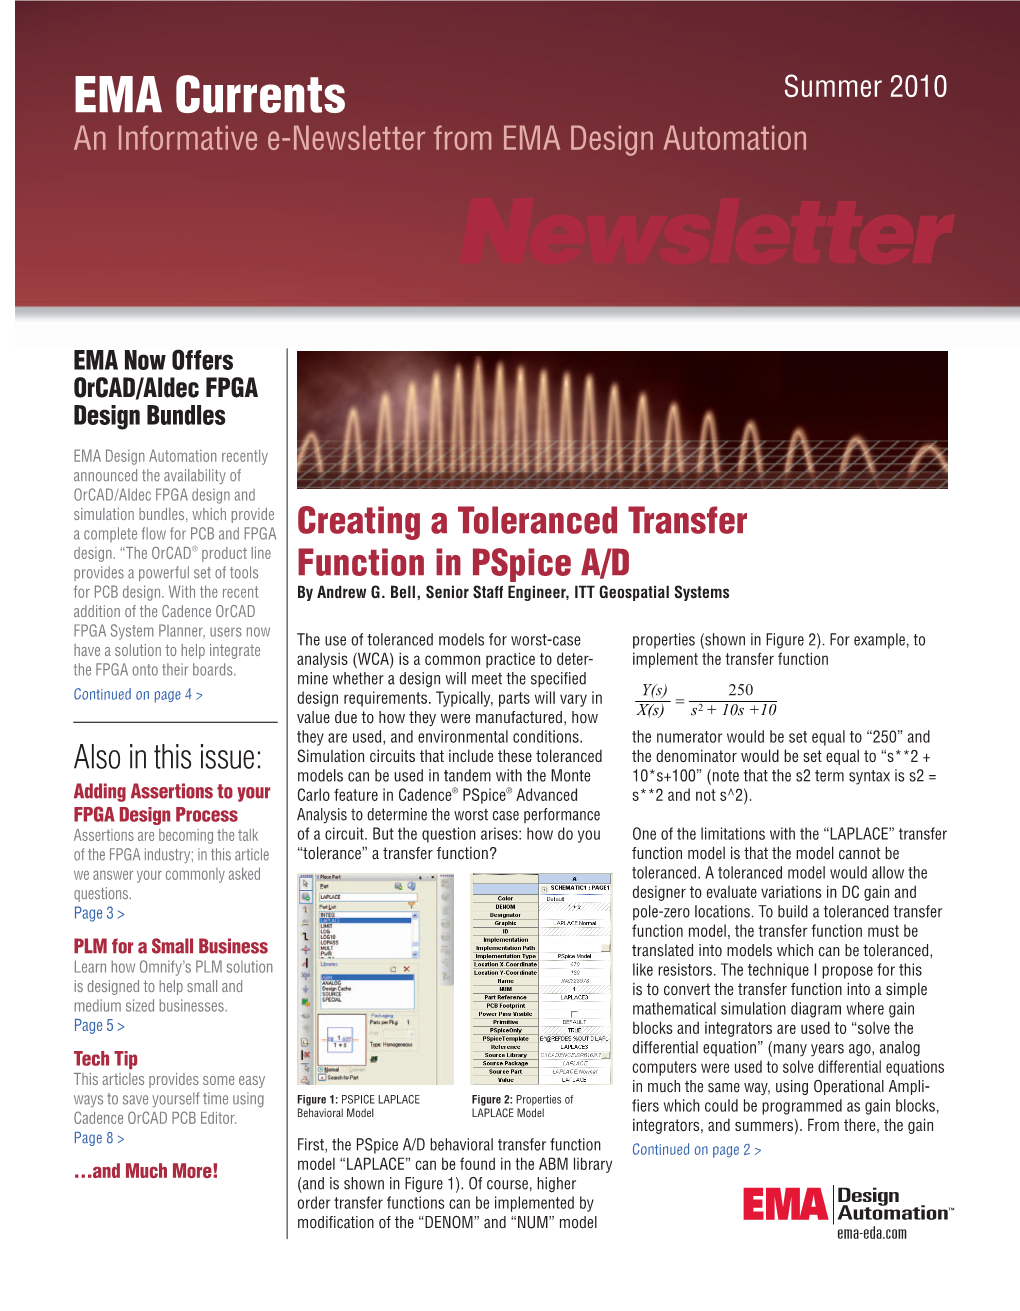 2010 EMA Currents Newsletter